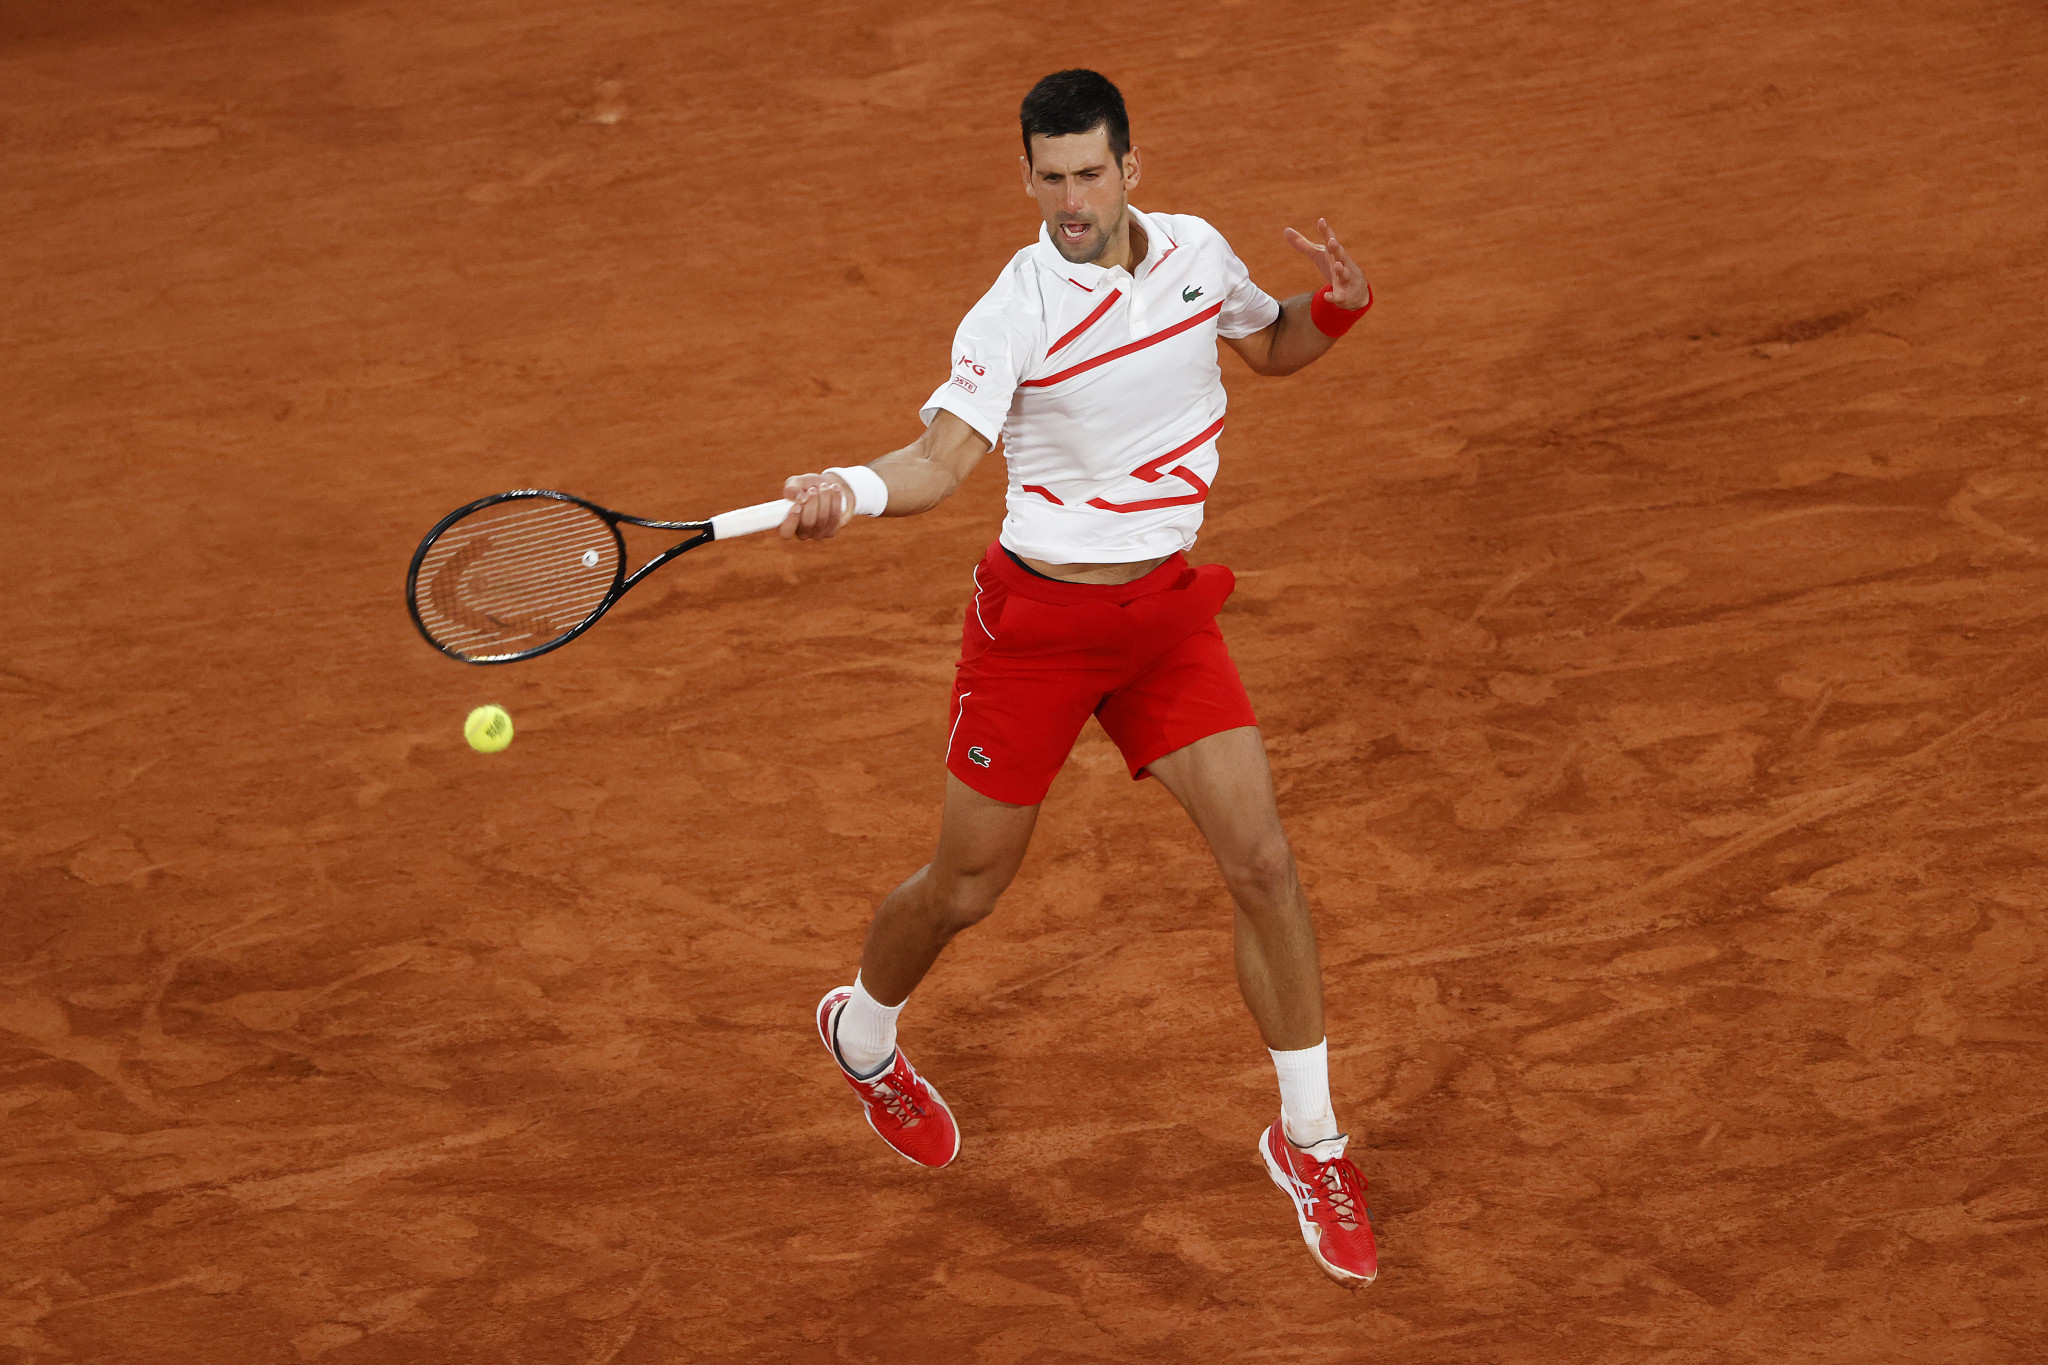 Djokovic enjoys comprehensive win as French Open first round concludes